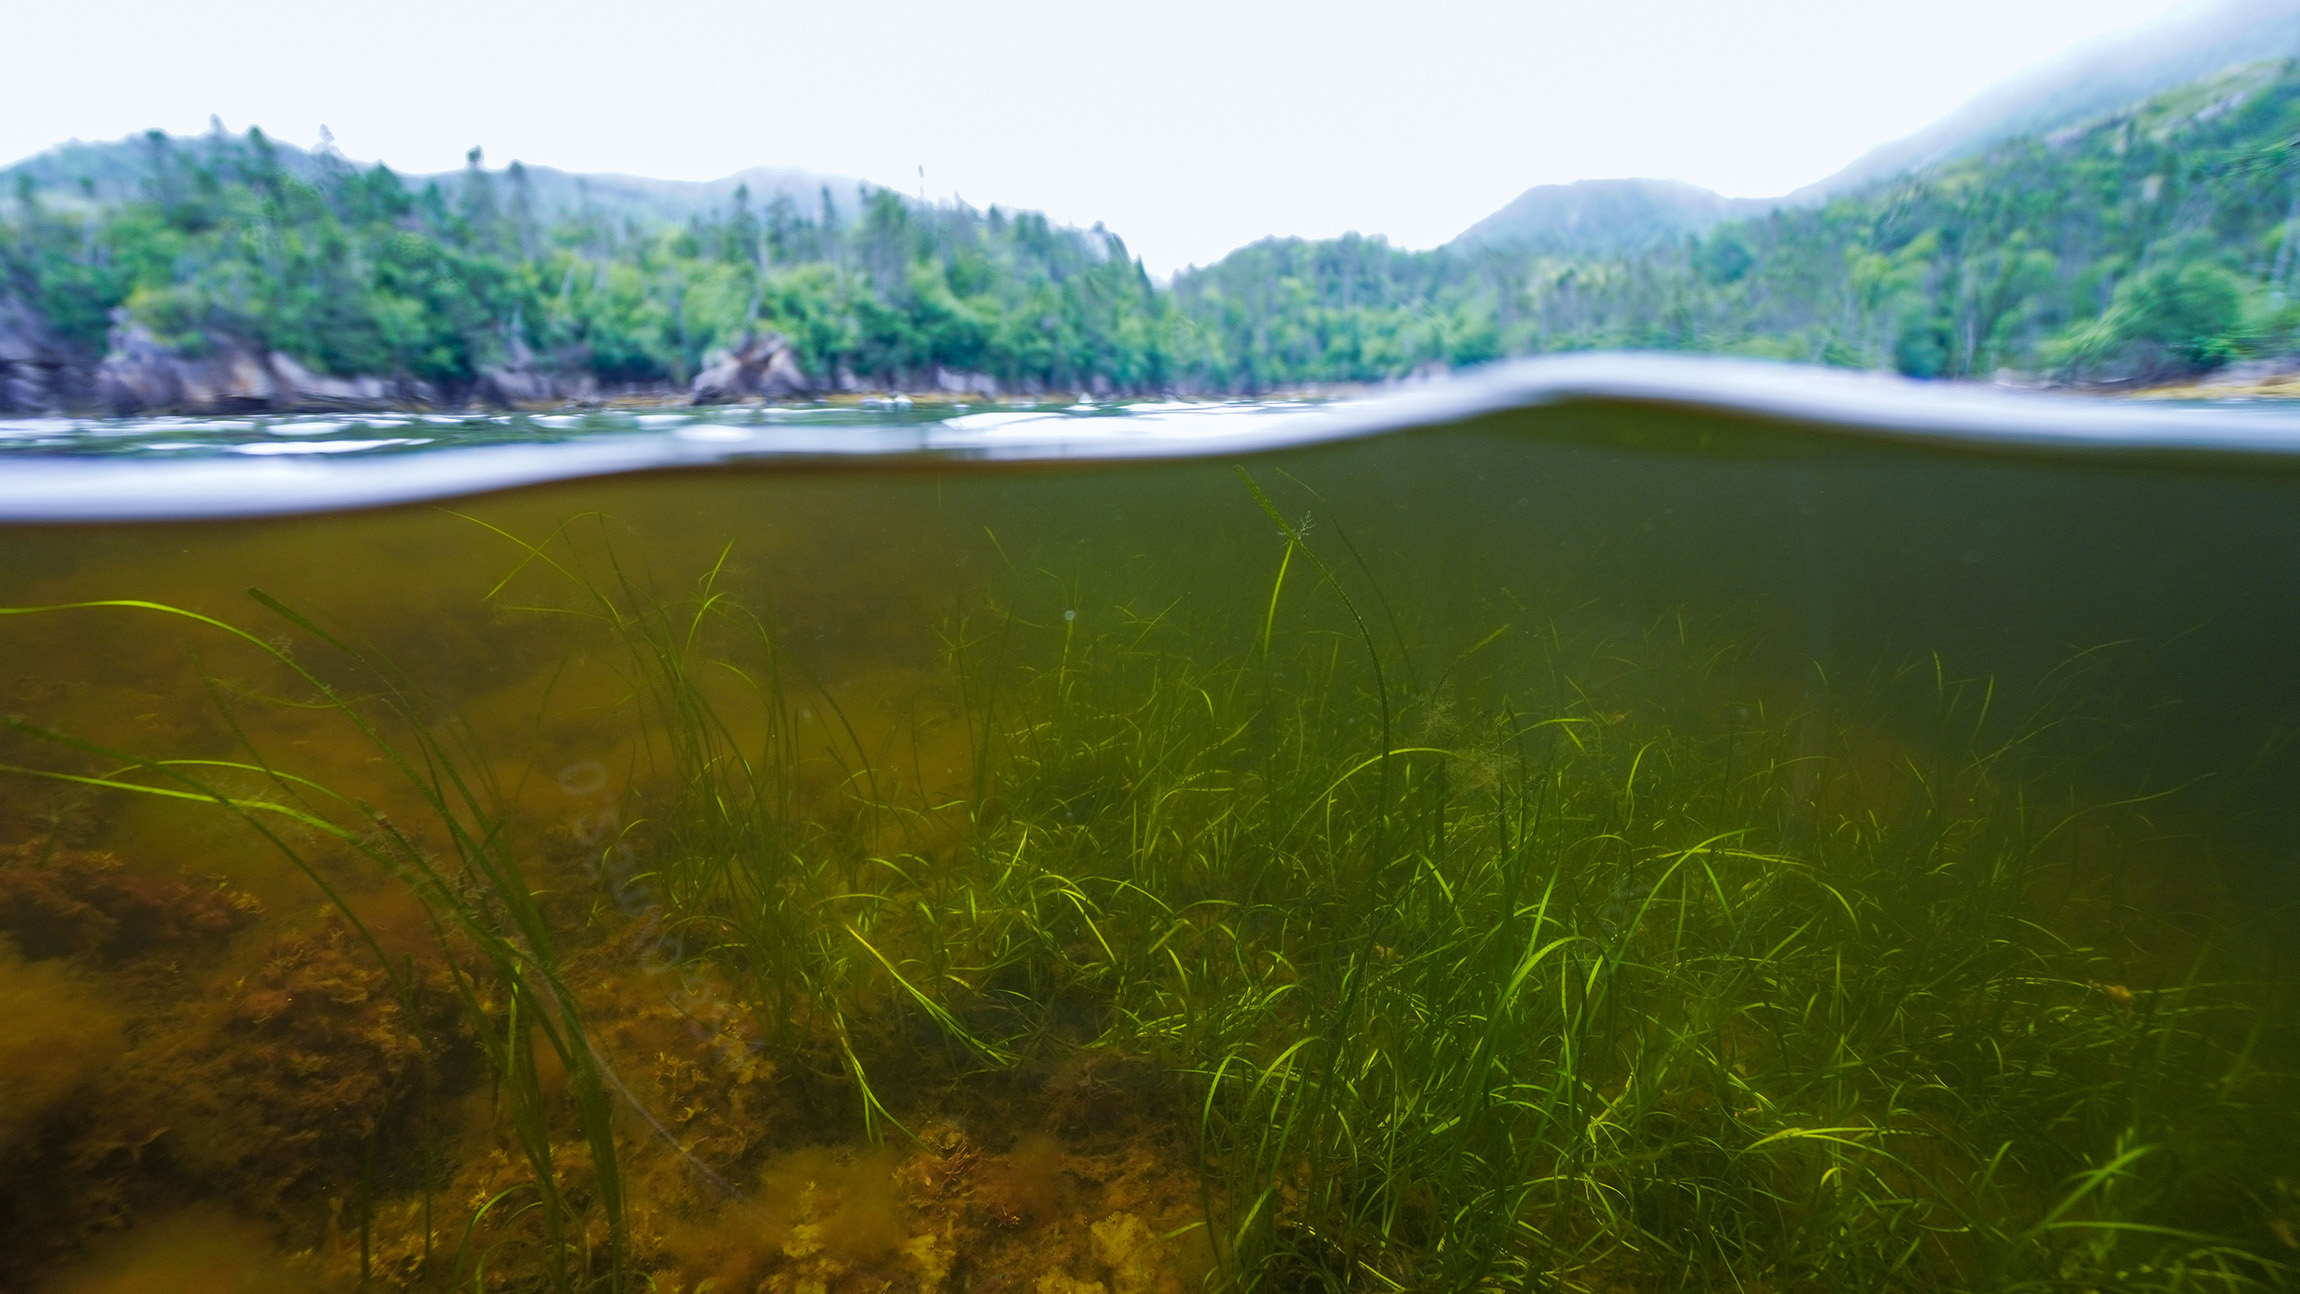 The half-underwater camera lens shows green seagrass growing in clear water out of the brown seafloor. Out of the water, a rocky and forested shoreline is visible in the background. 